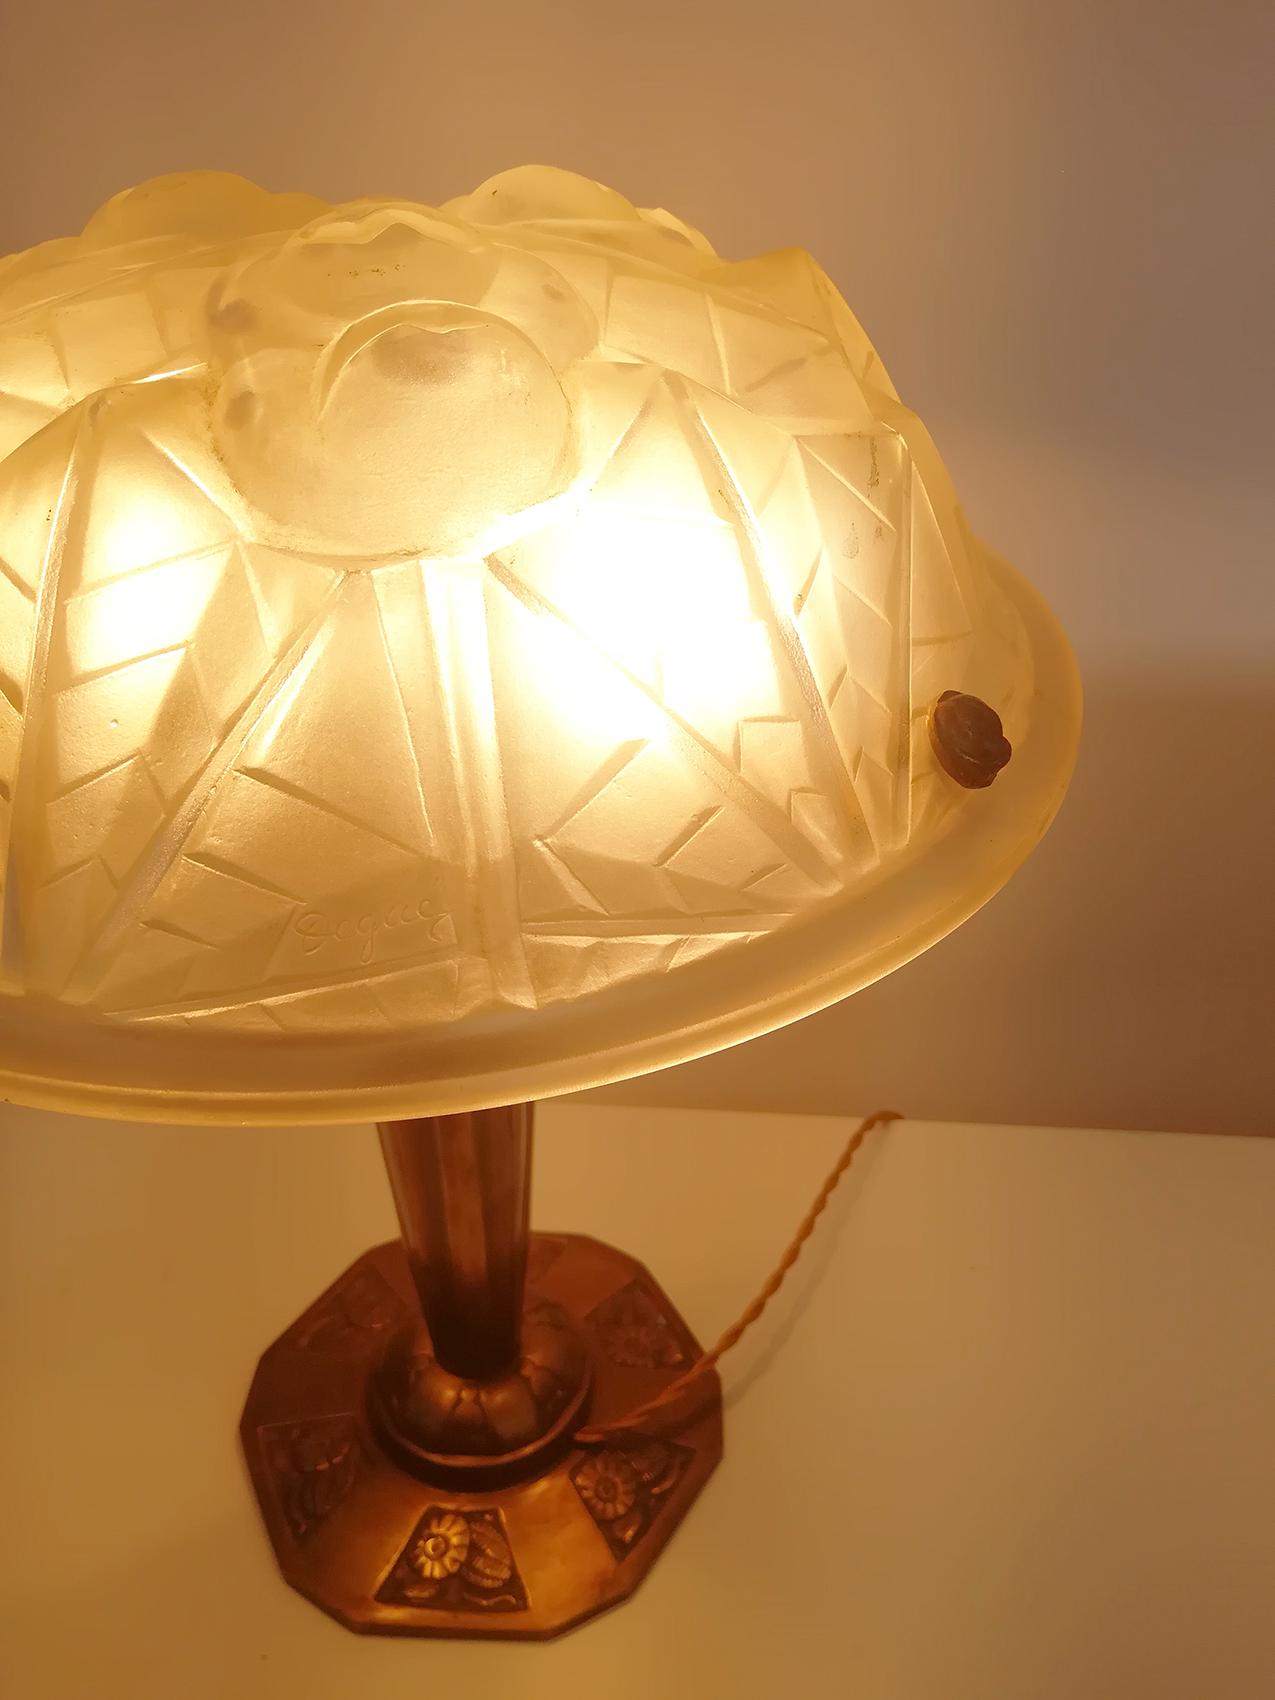 Pair of French Art Deco Table Lamp Signed “Degué” In Good Condition For Sale In Beirut, LB